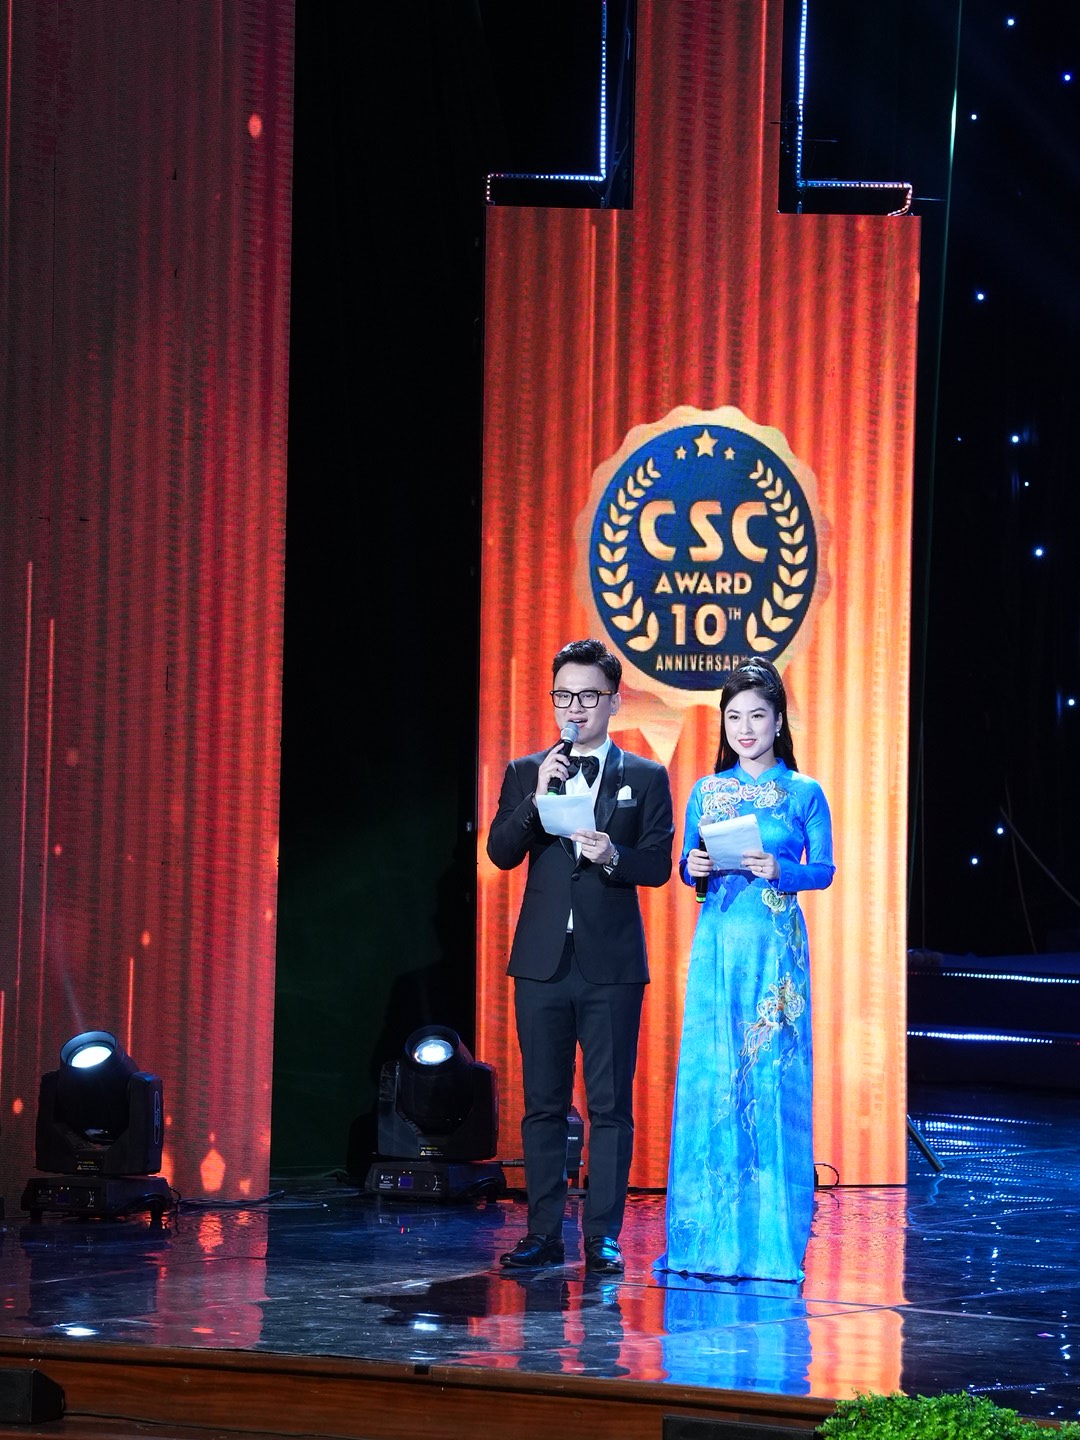 VINACONEX ACCOMPANYING WITH CSC AWARD 2022 – AWARD FOR EXCELLENT STUDENTS OF HANOI UNIVERSITY OF CIVIL ENGINEERING